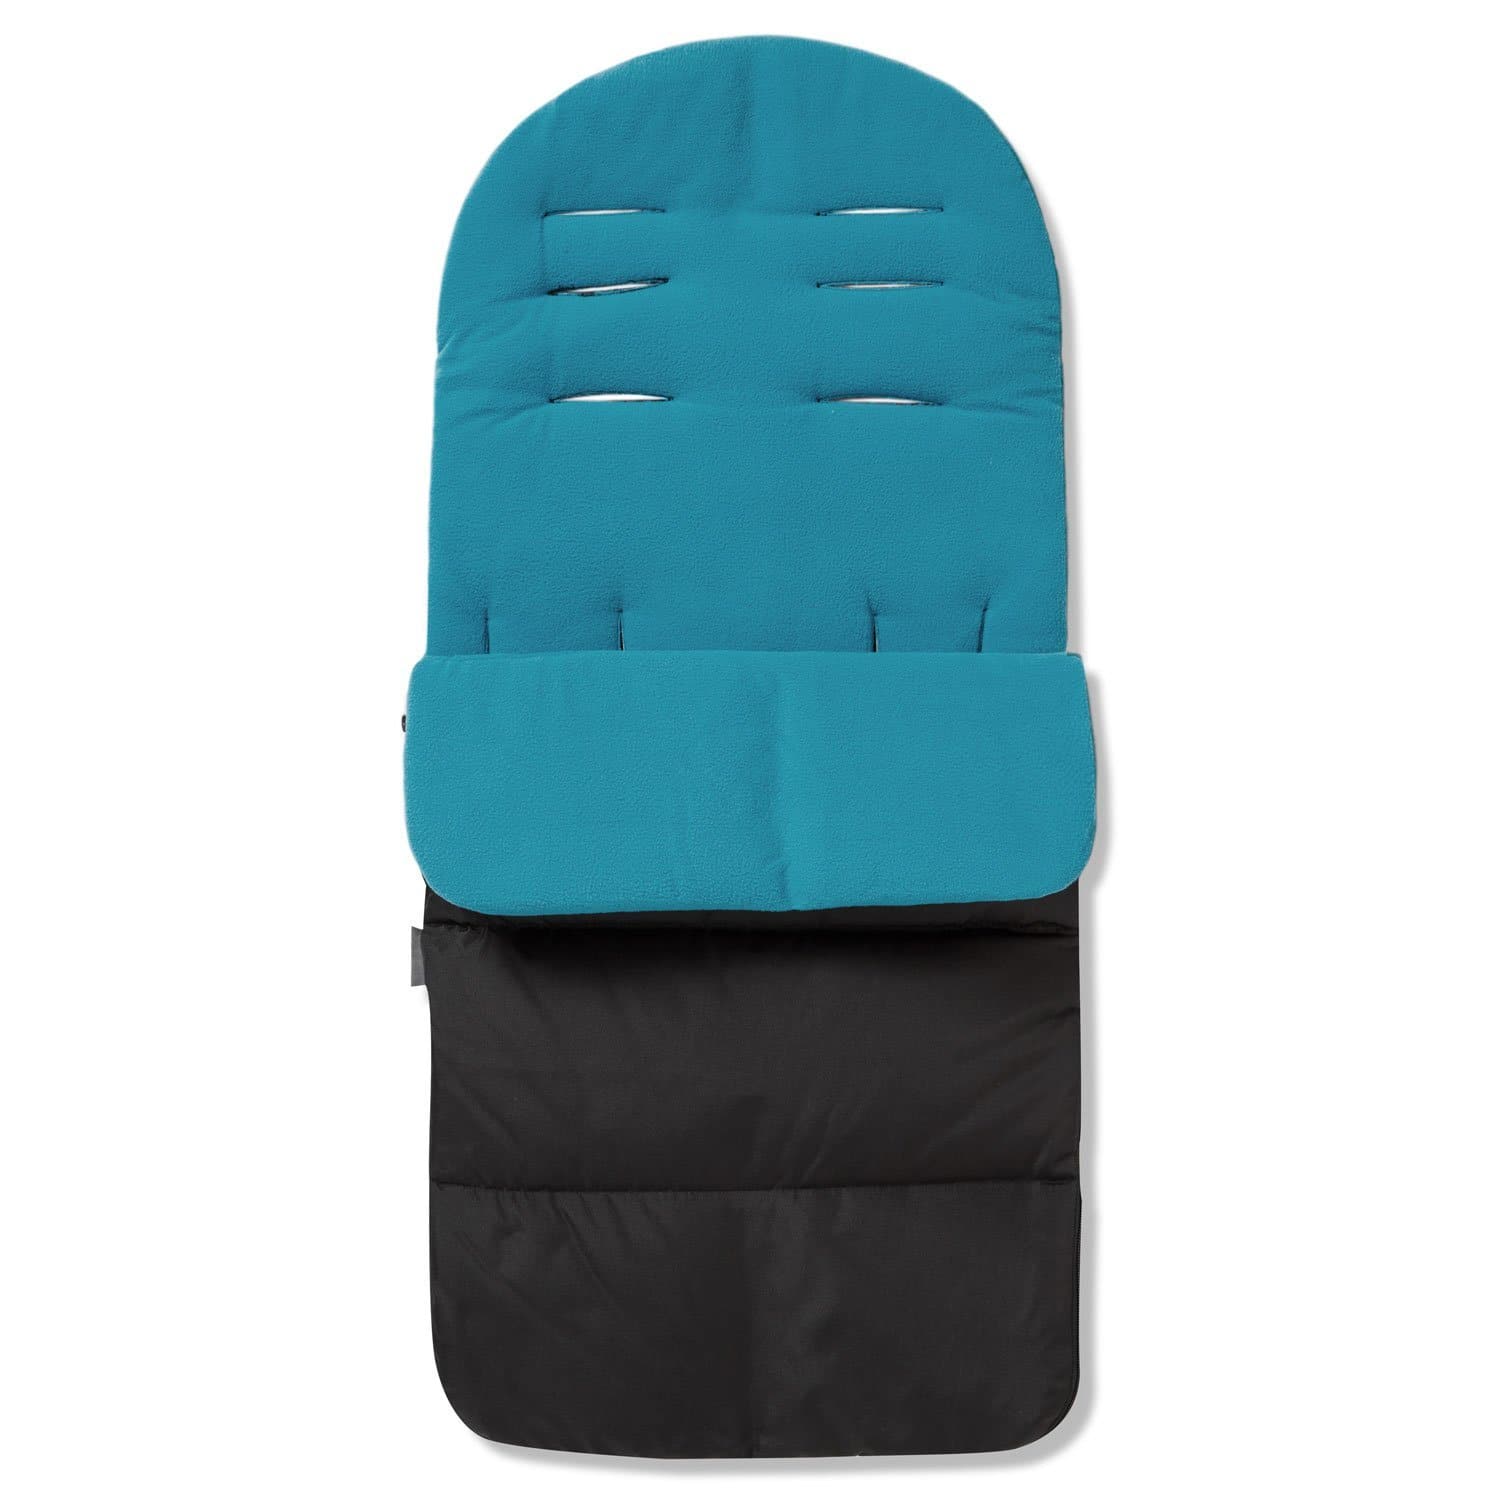 Premium Footmuff / Cosy Toes Compatible with Bumbleride - Ocean Blue / Fits All Models | For Your Little One